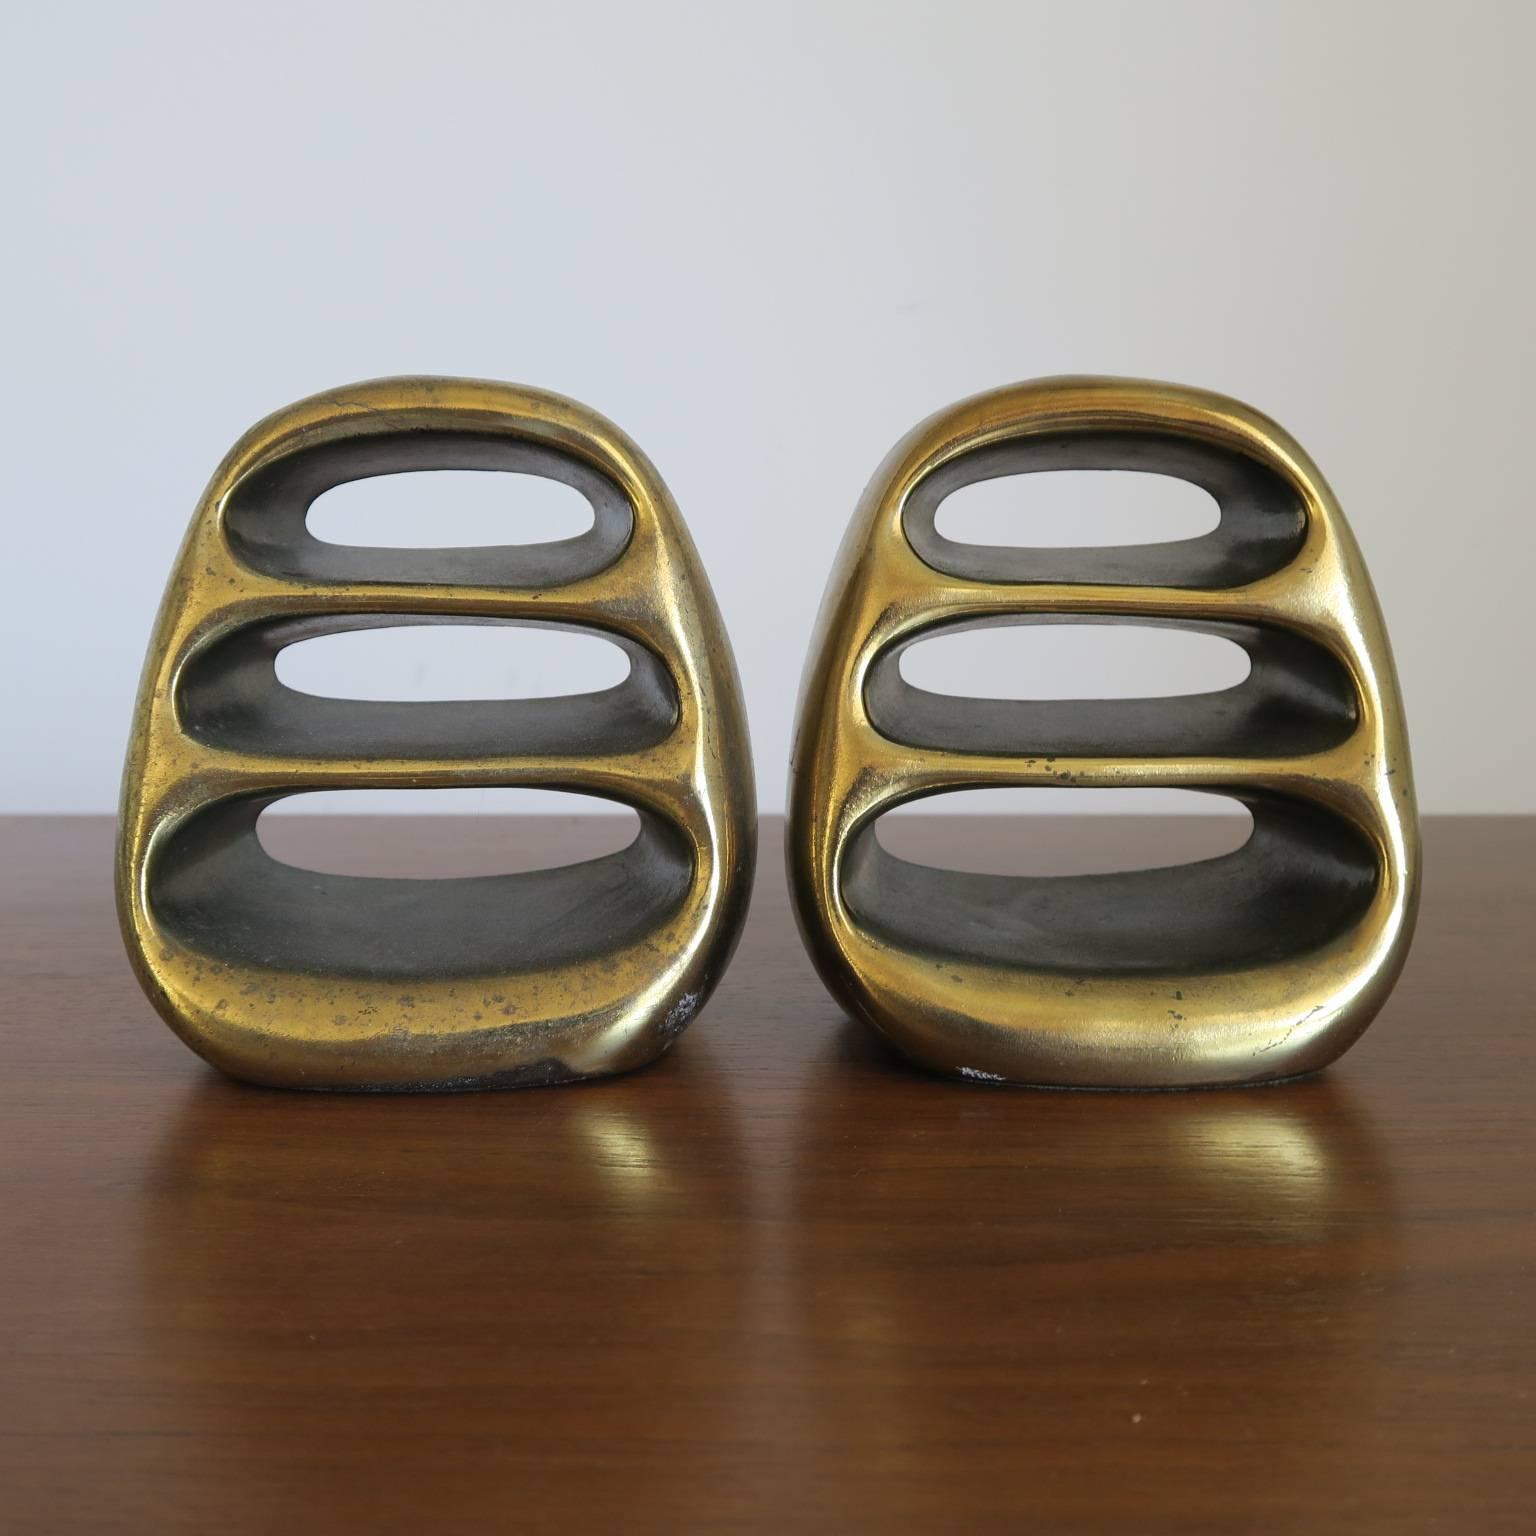 Ben Seibel bookends in brass-plated cast metal, circa 1950s, good vintage condition, each measures 5 high x 4.5 wide x 3 deep inches.